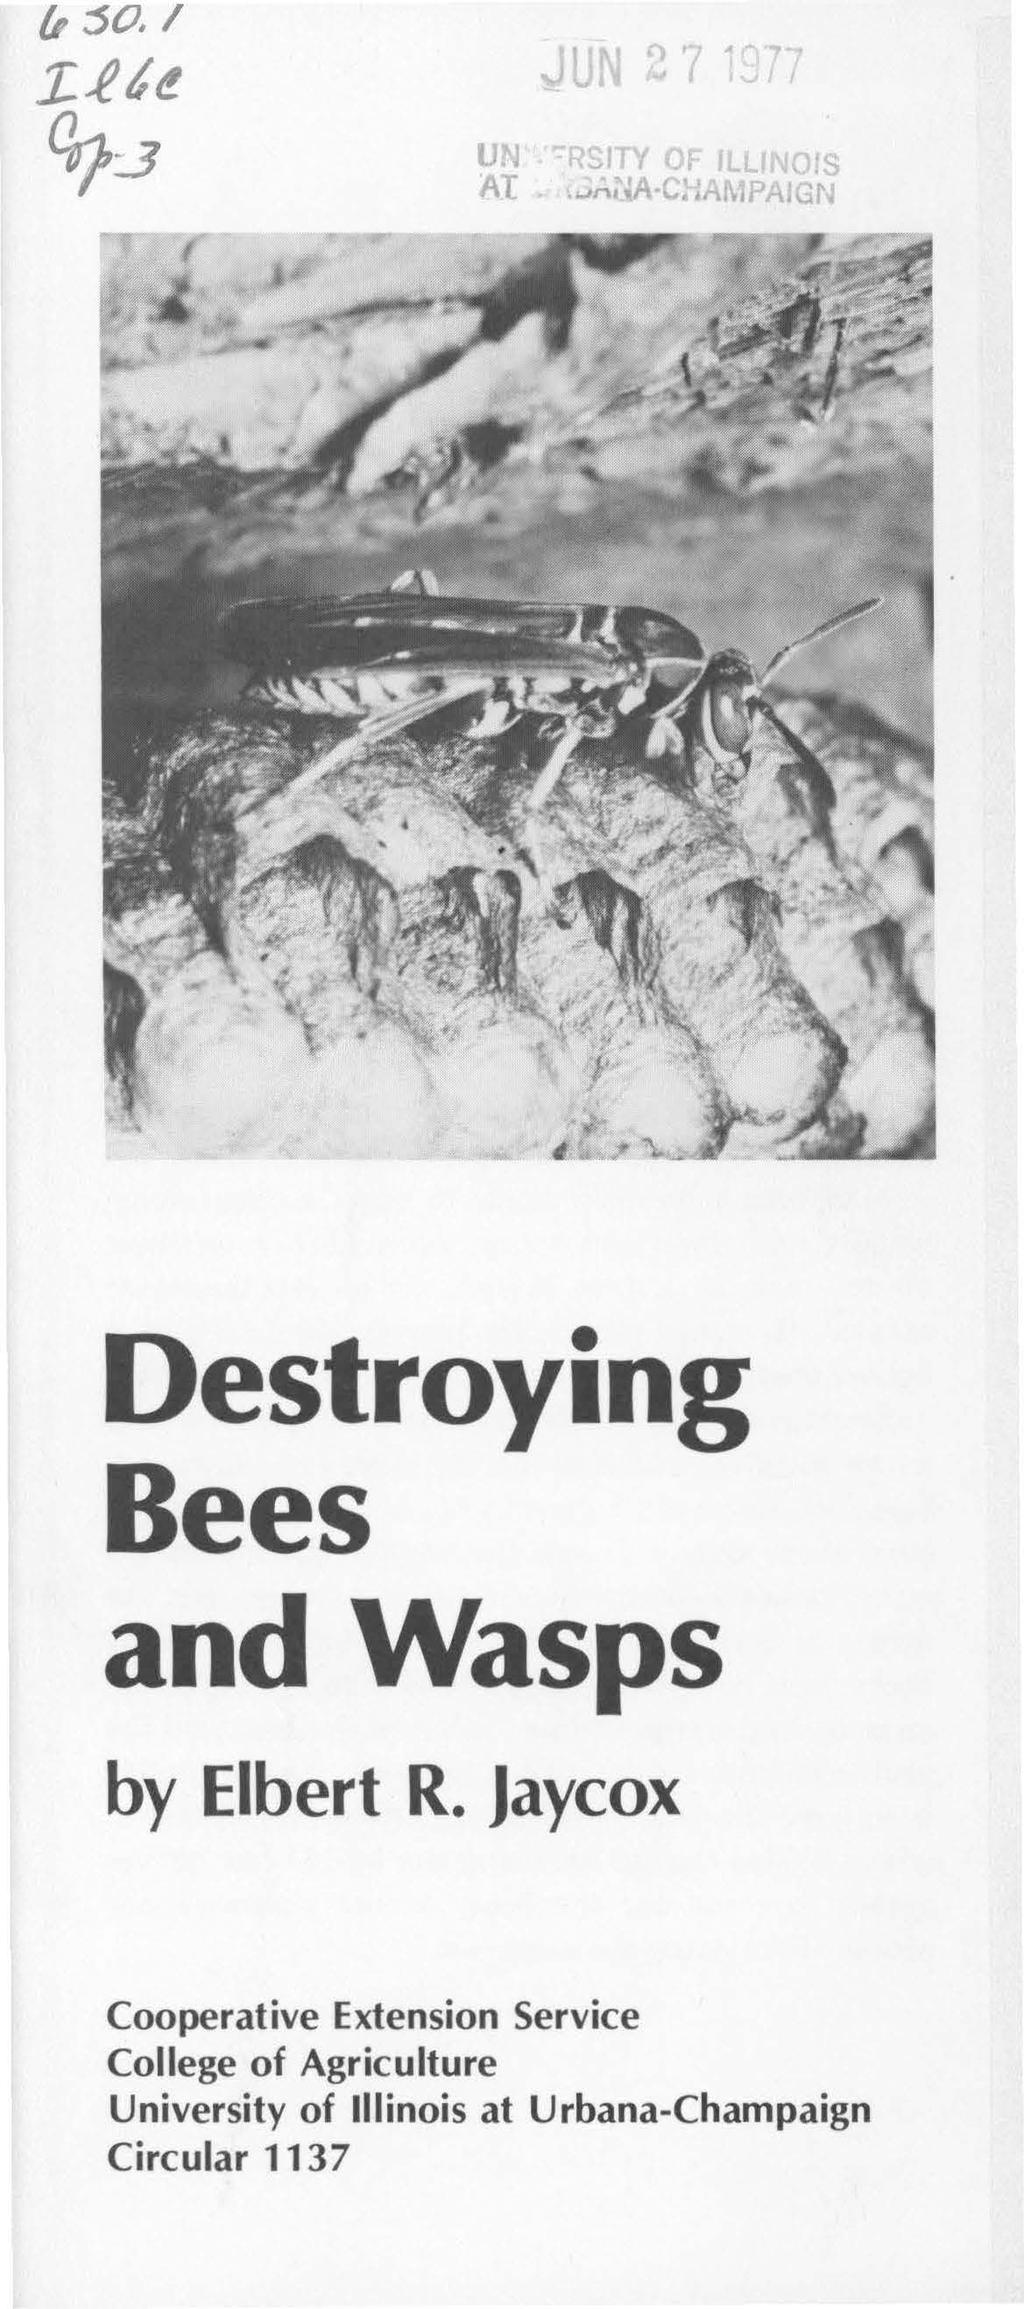 JUN 2 7 1 977 UN '='RSITY OF ILLINOIS AT,..,,;.~-C;JAMPAIGN Destroying Bees and Wasps by Elbert R.